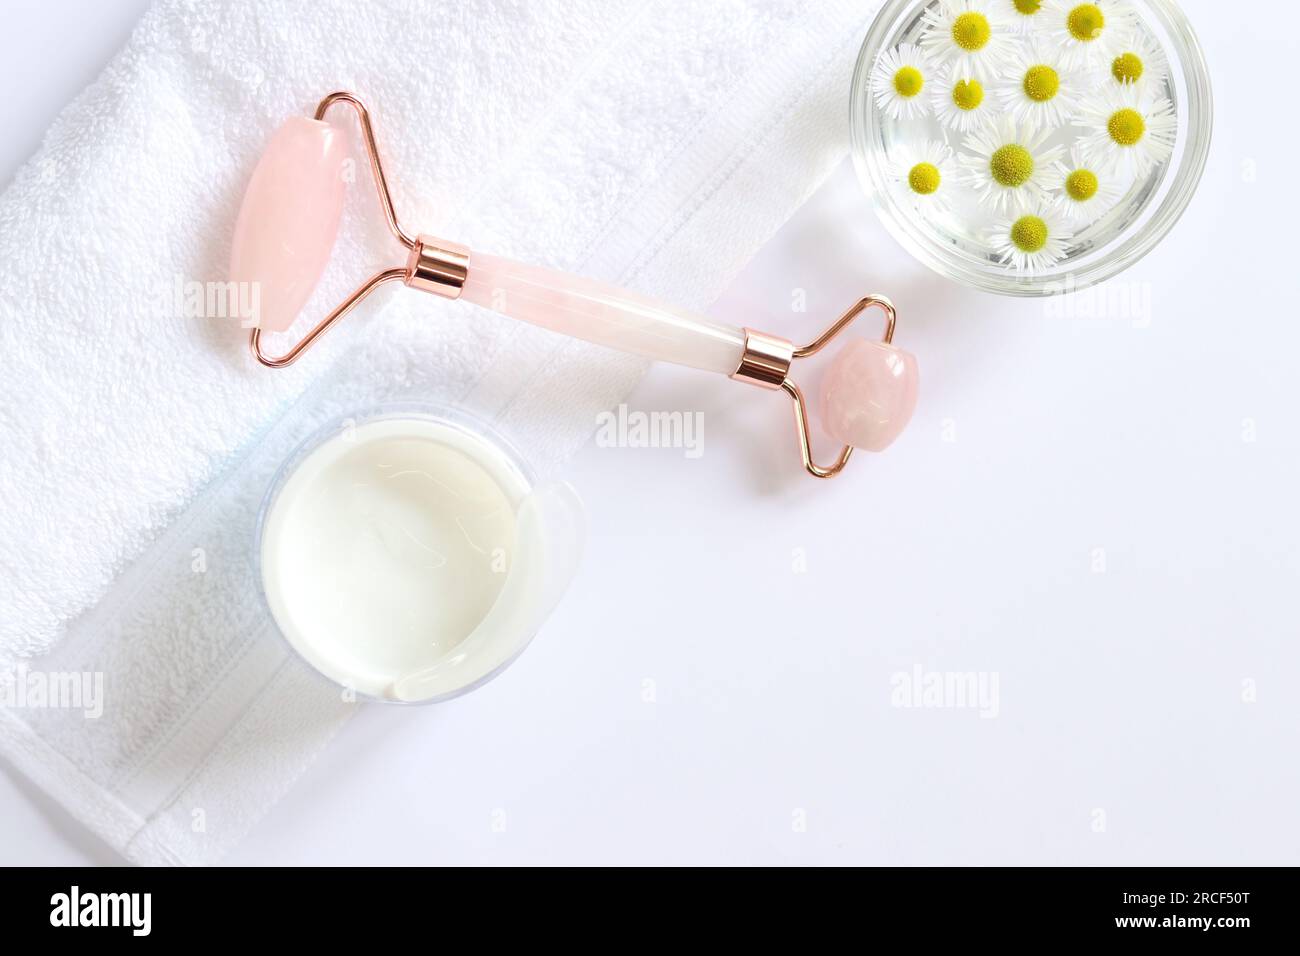 Rose quartz facial roller. Facial massage roller, chamomile water, cream and white towel. Flat lay on a light background. Top view, copy space. Spa Stock Photo